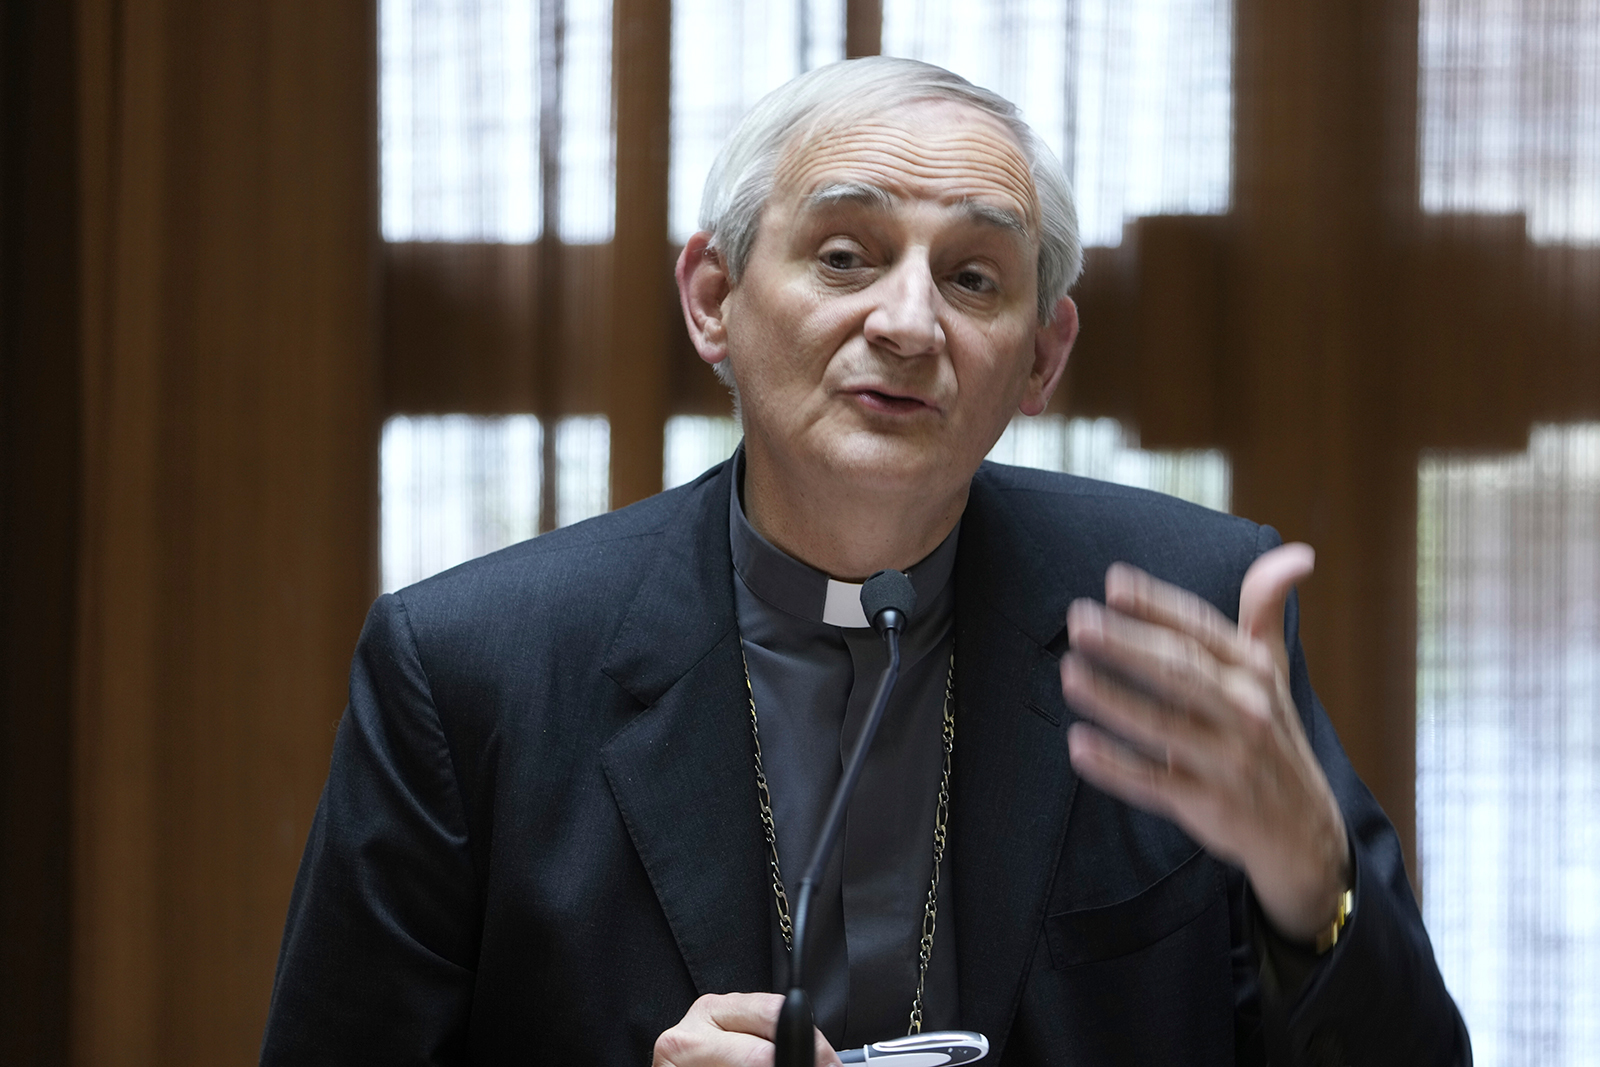 Cardinal Matteo Zuppi speaks during a press conference at The Vatican, on May 25.